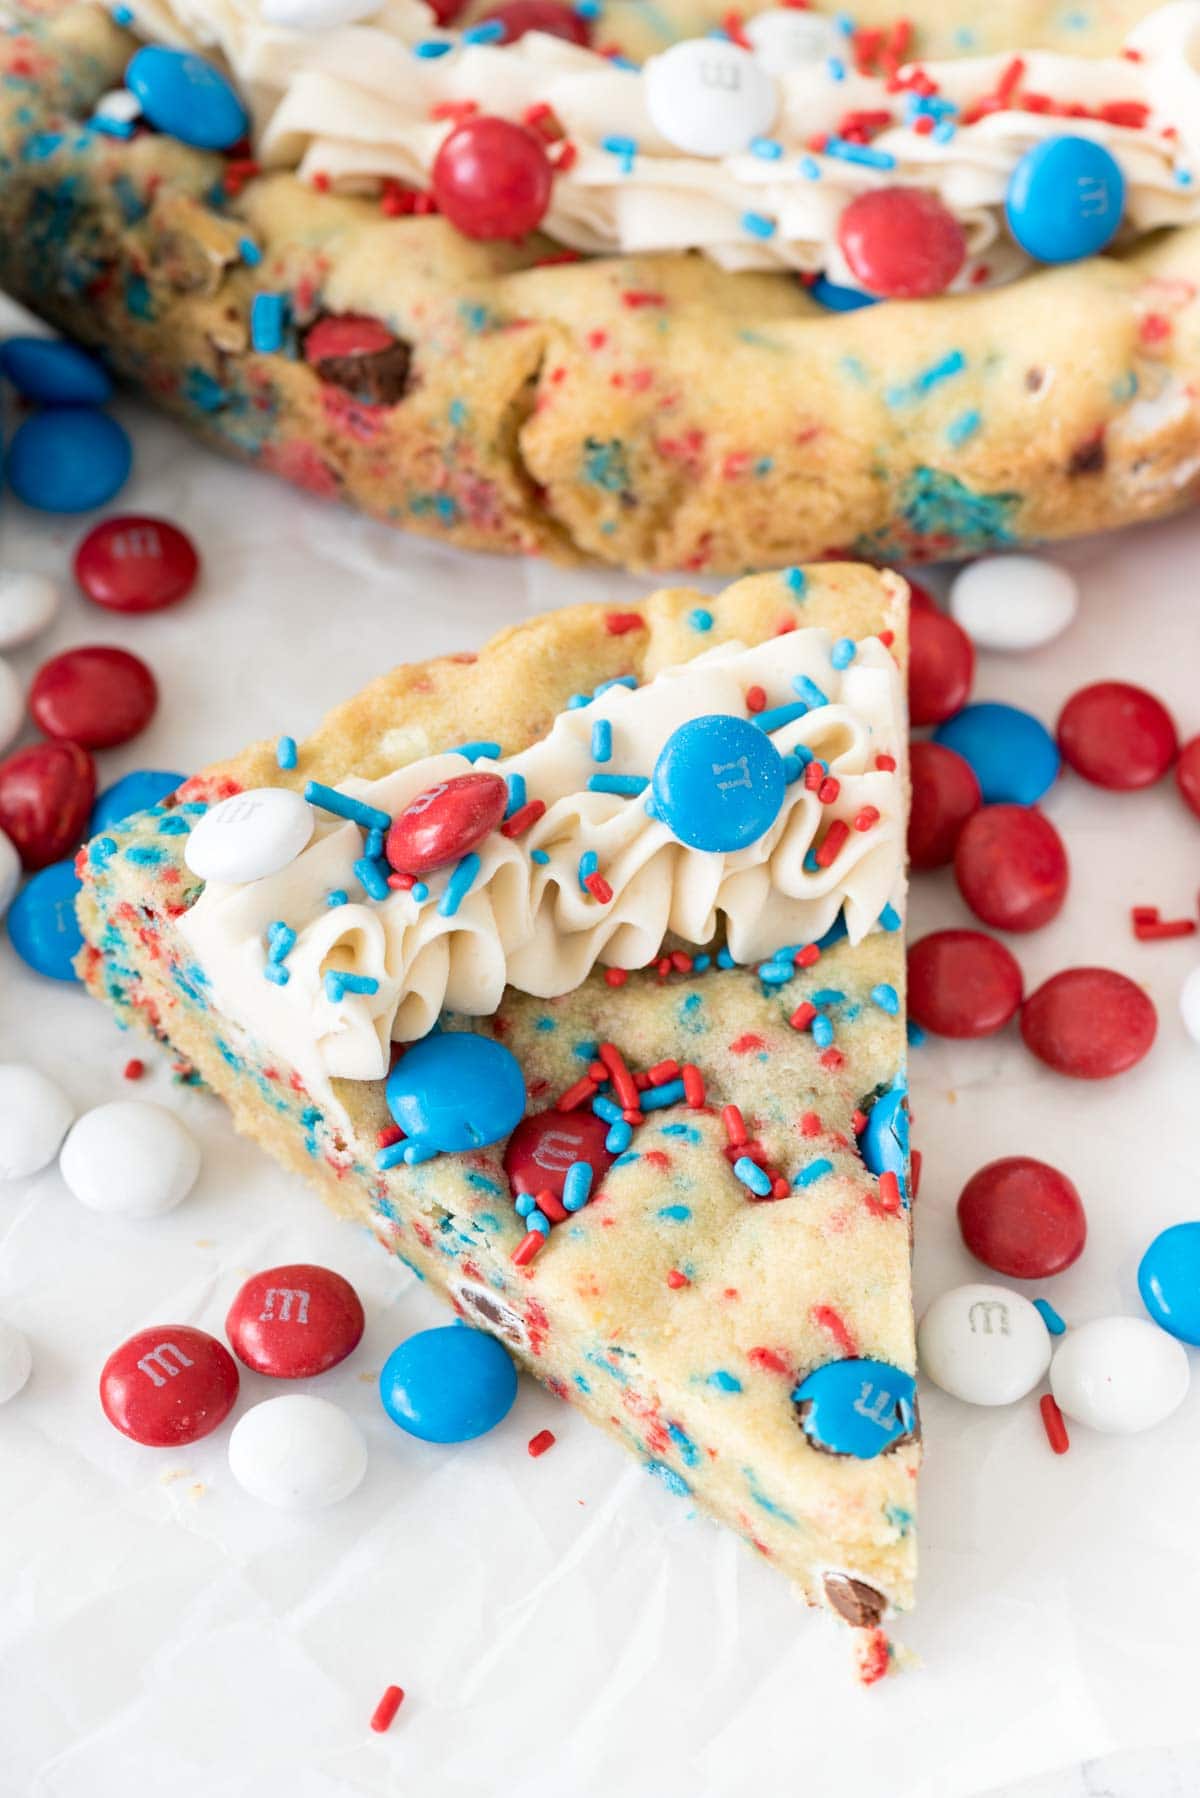 Fireworks Sugar Cookie Cake Recipe - this EASY sugar cookie recipe is made in a cake pan! Such a great dessert for the 4th of July!